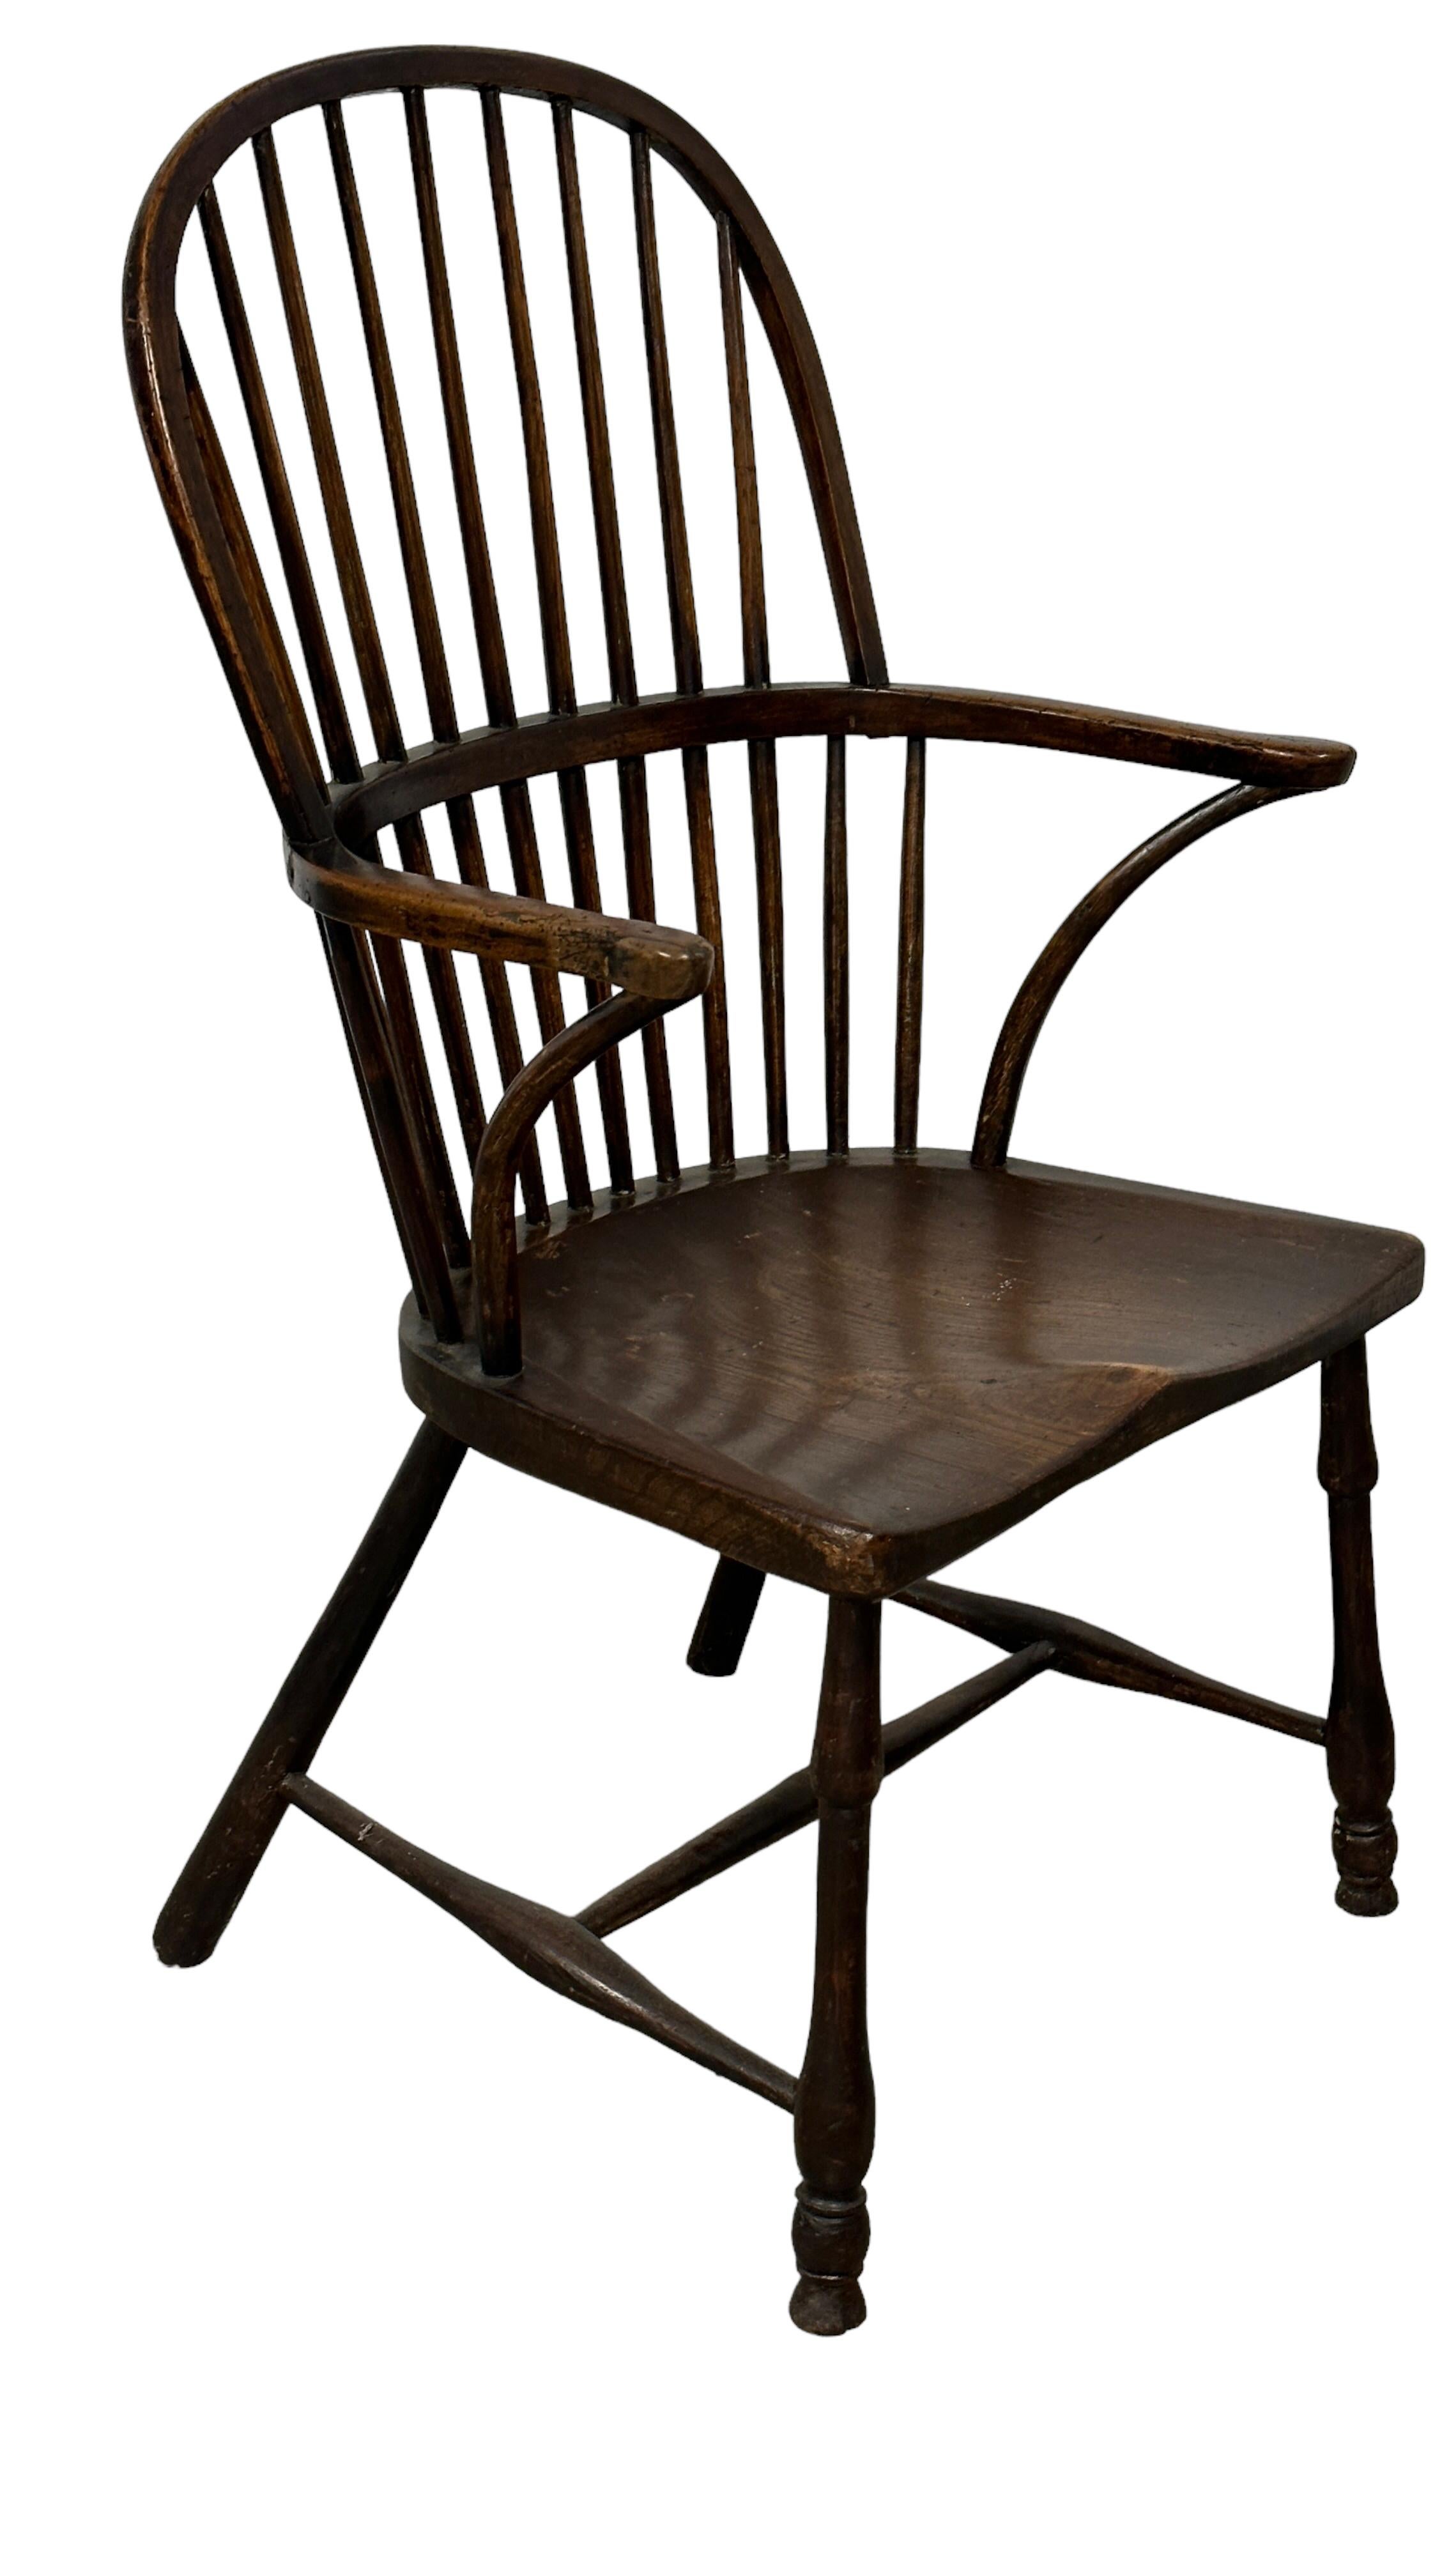 Beautiful Antique Windsor Wooden Chair, 19th Century, England 4